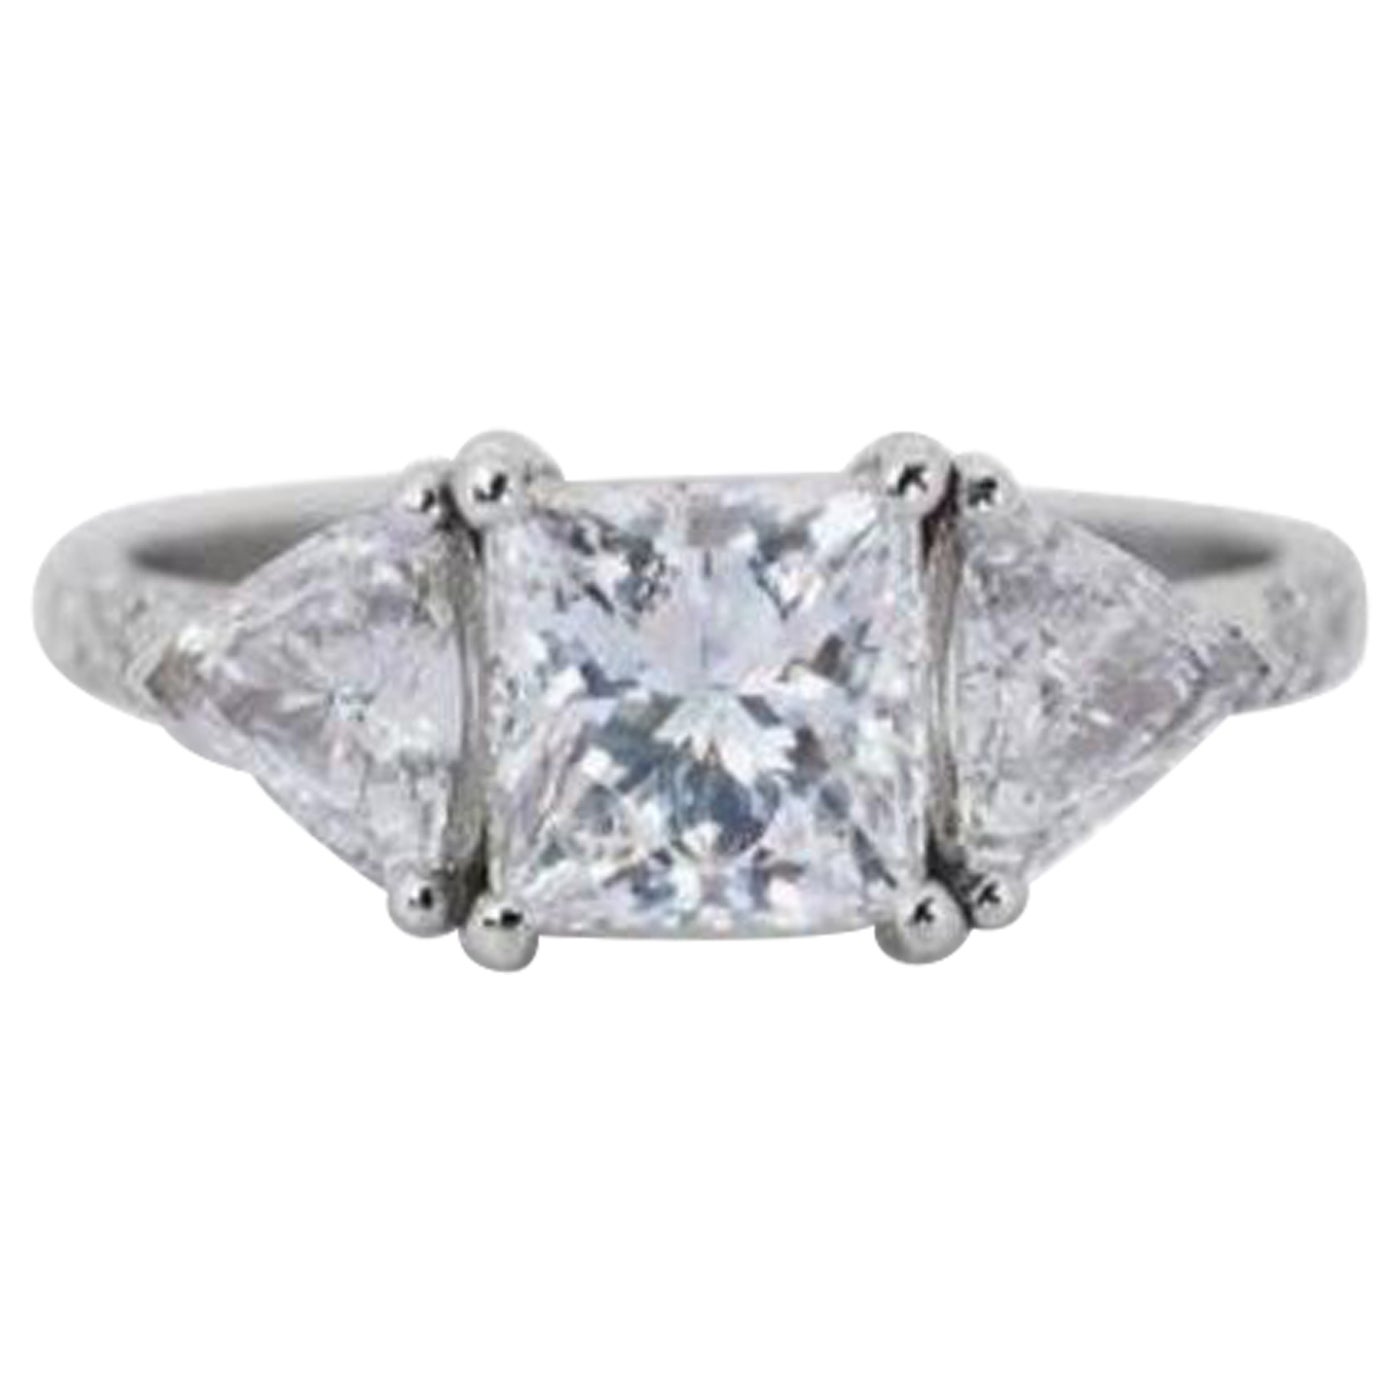 Dazzling 2.71ct Diamond Ring set in gleaming 18K White Gold For Sale